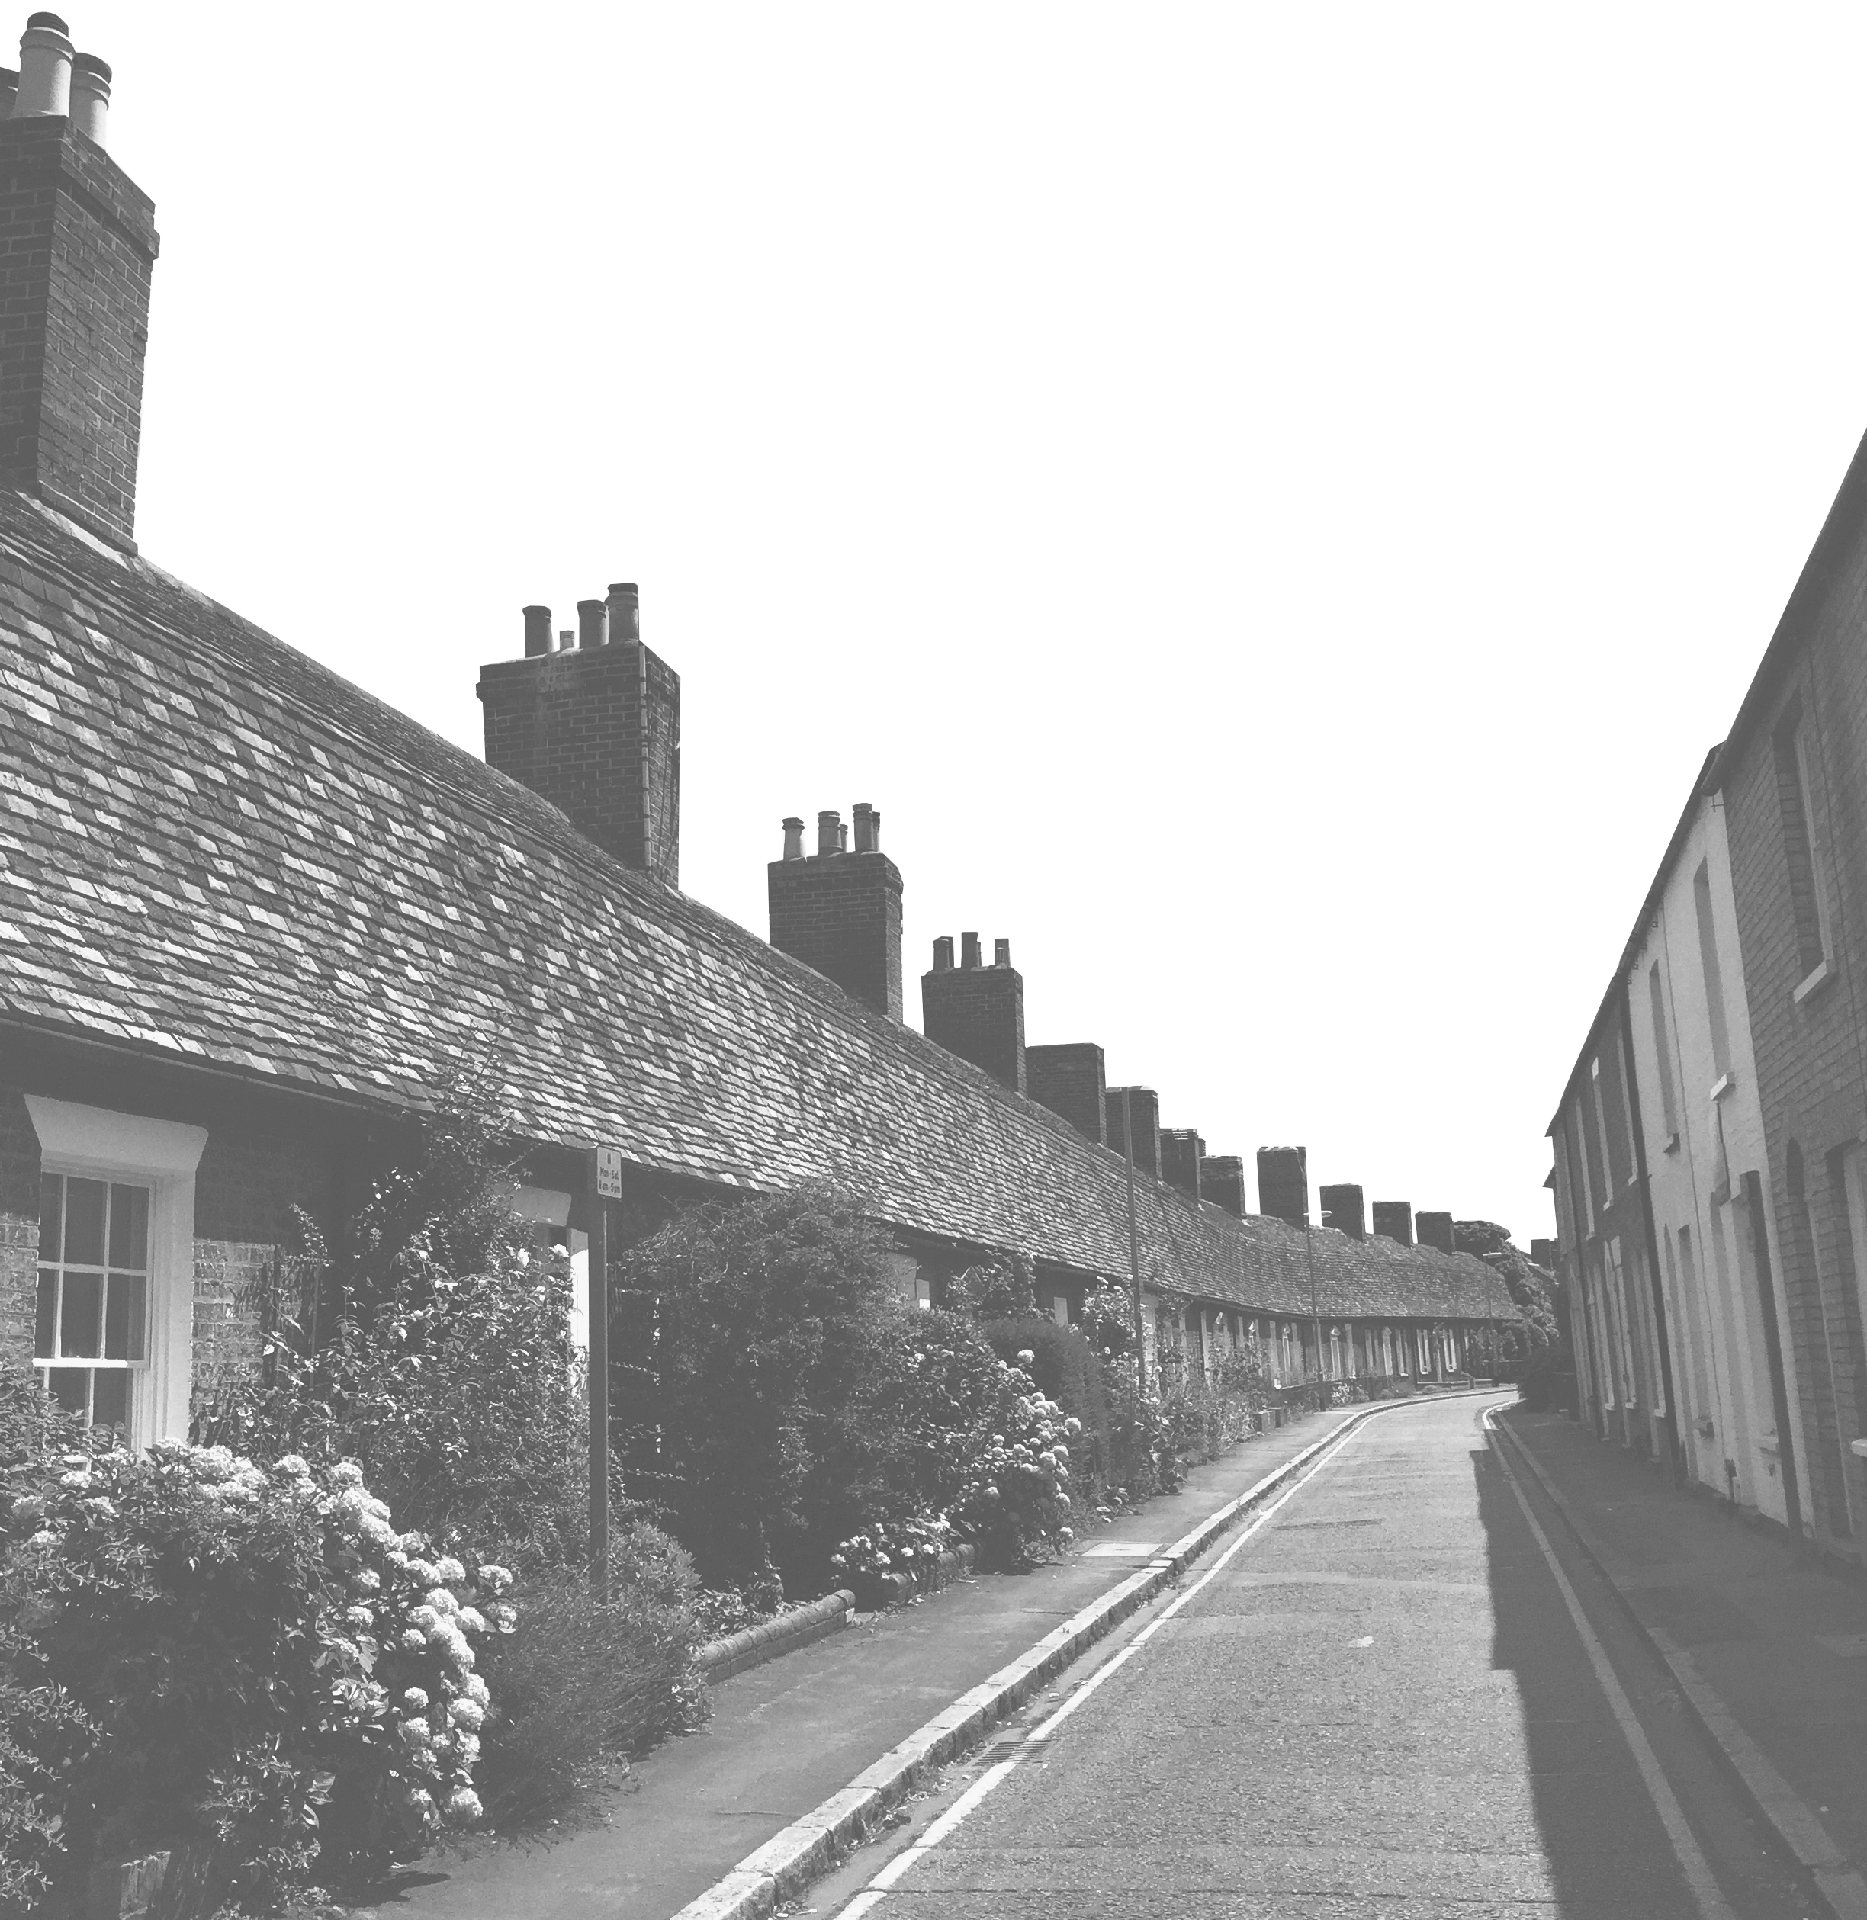 A row of cottages